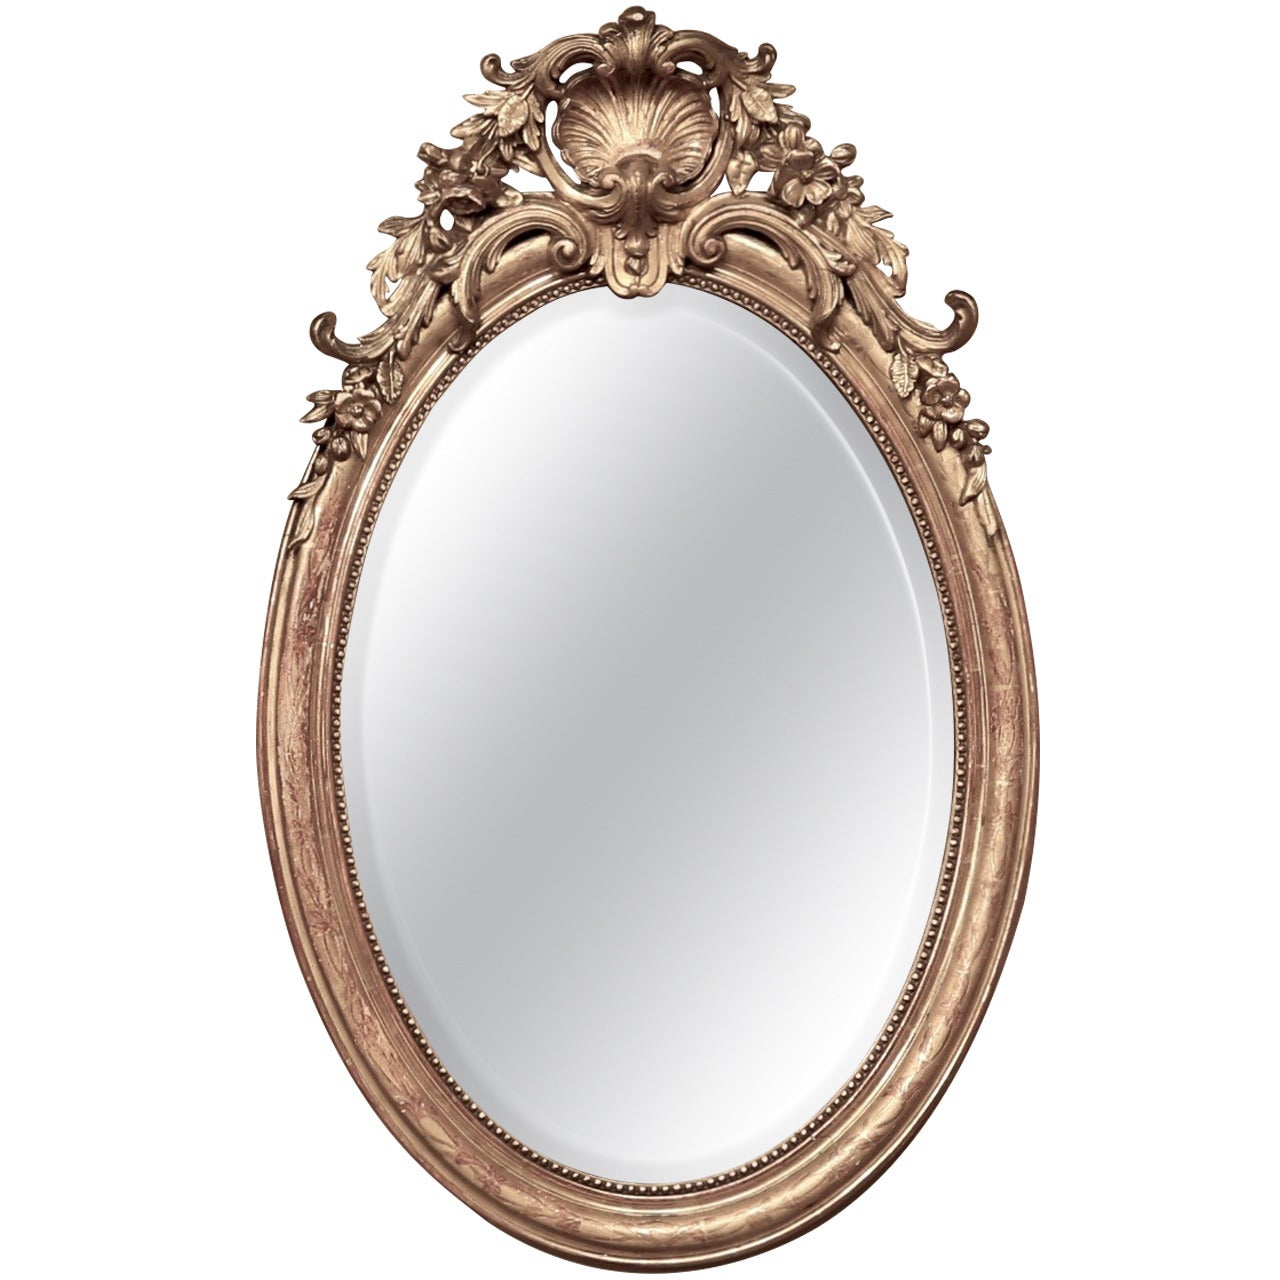 19th Century French Neoclassical Gilded Oval Mirror